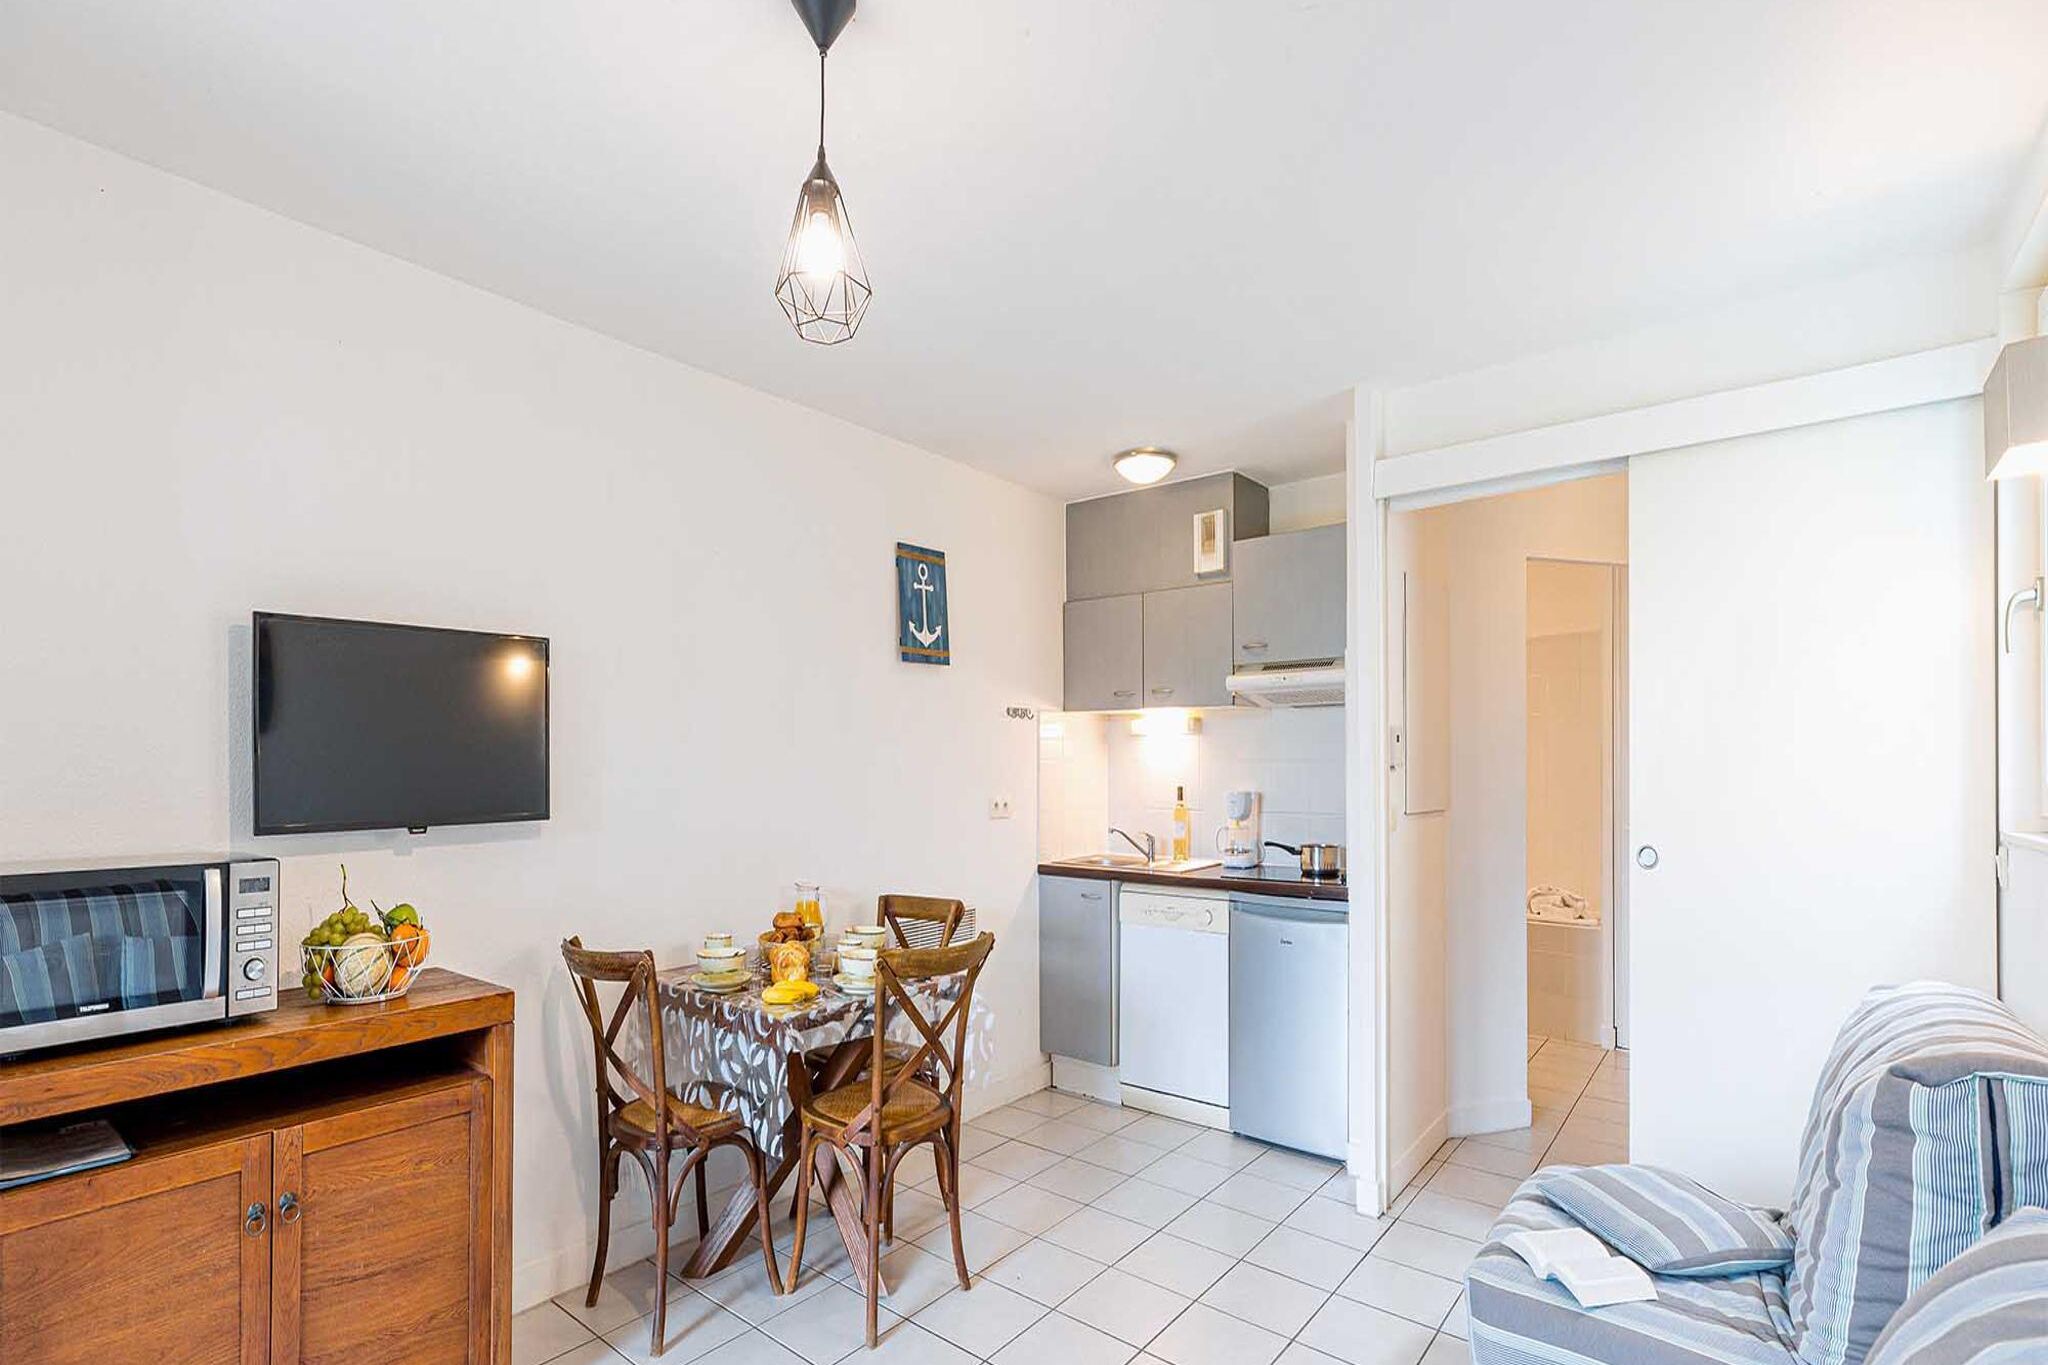 Cozy apartment with dishwasher, near the port of Le Teich